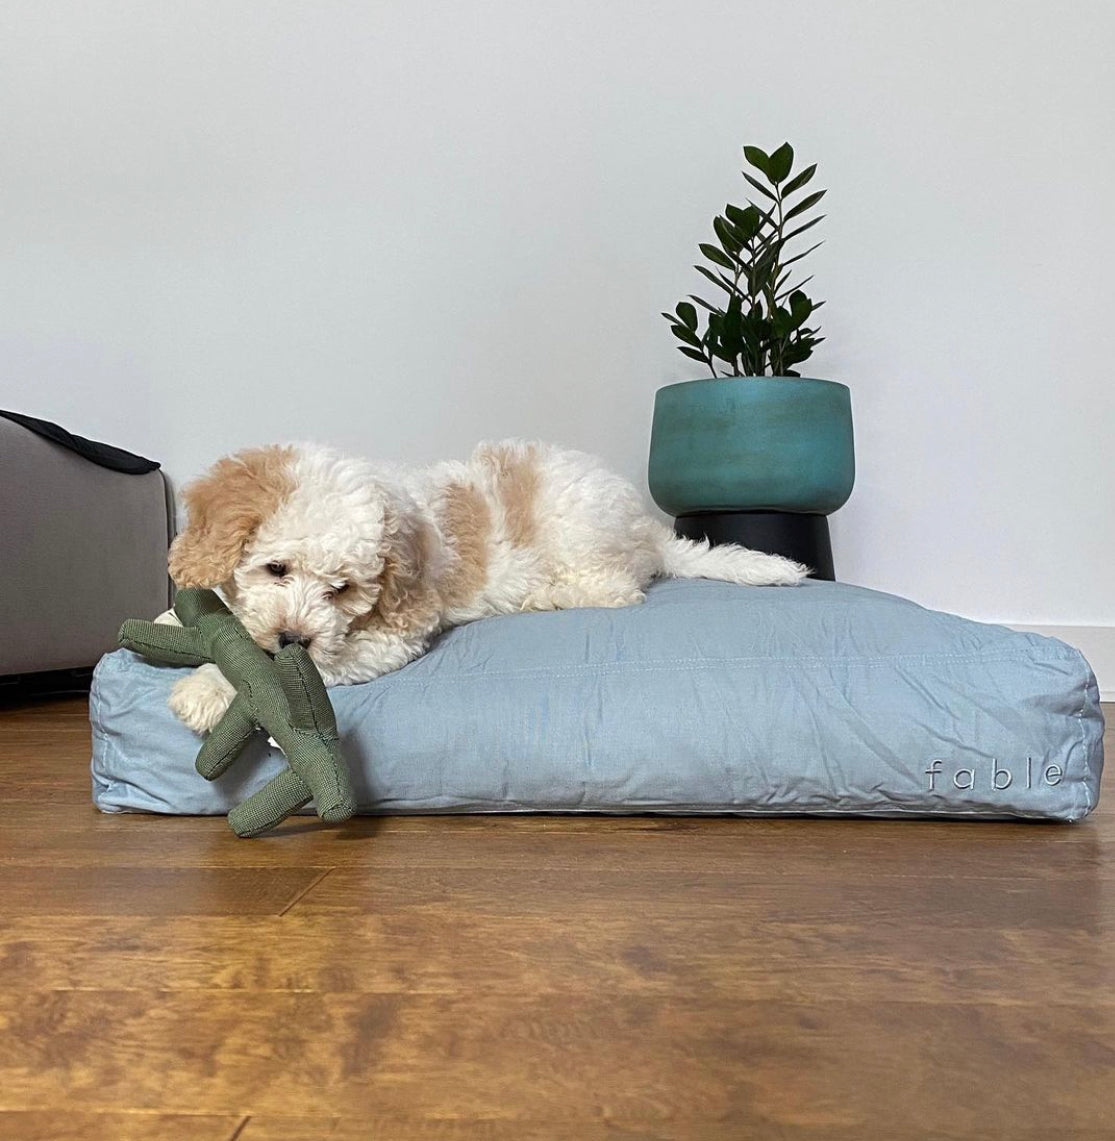 Fable  Dog Bed - Modern Designs for Small and Big Dogs